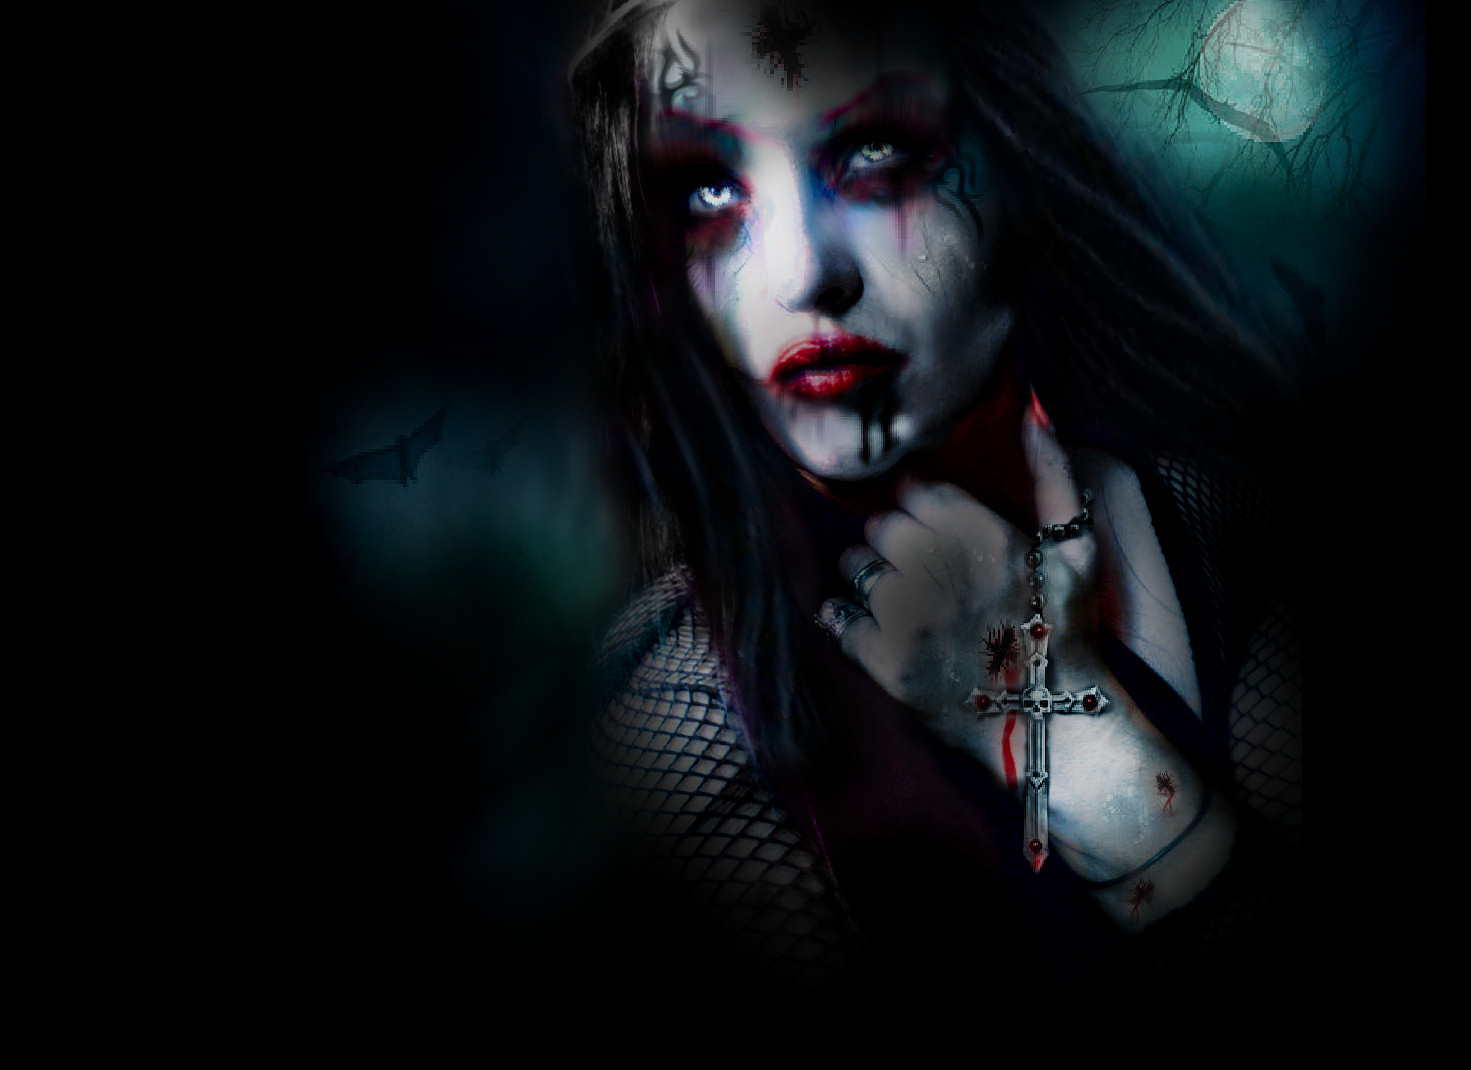 Download Vampire wallpaper for mobile phone, free Vampire HD picture